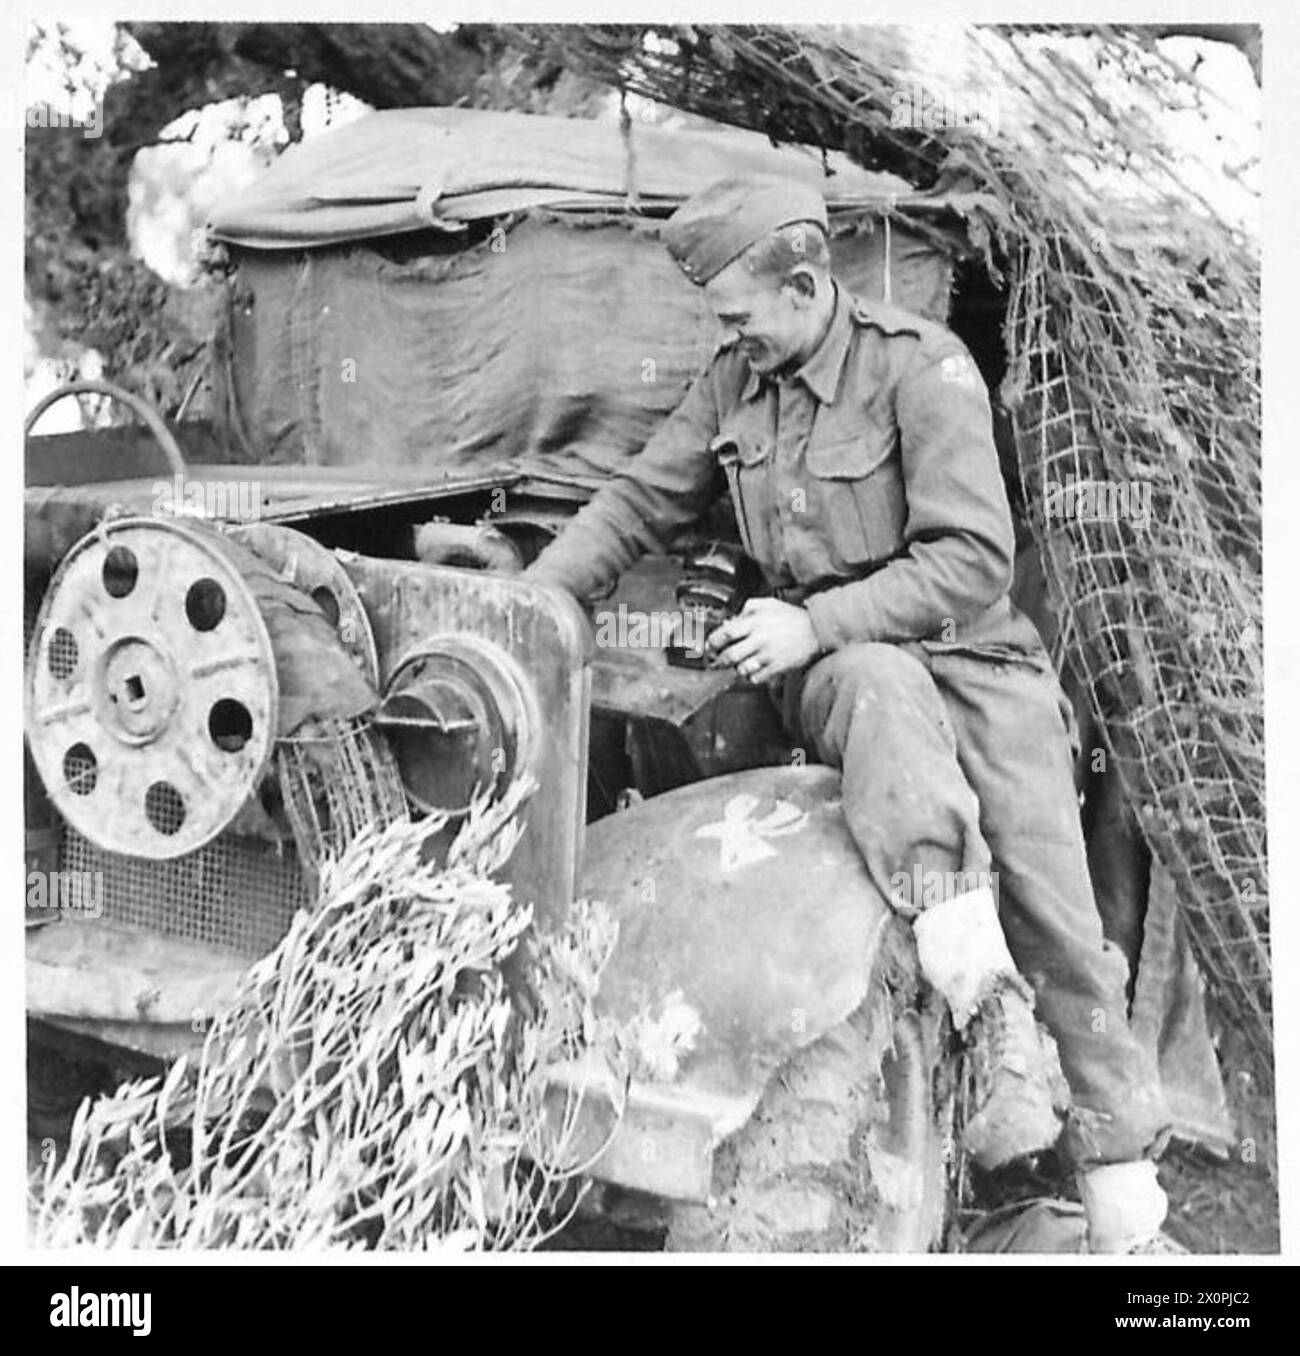 NEWFOUNDLAND GUNNERS IN ITALY - Dvr. H. Oke, of Corner Brook, Newfoundland, at work on his truck. Note the Newfoundland caribou on the mudguard. Photographic negative , British Army Stock Photo